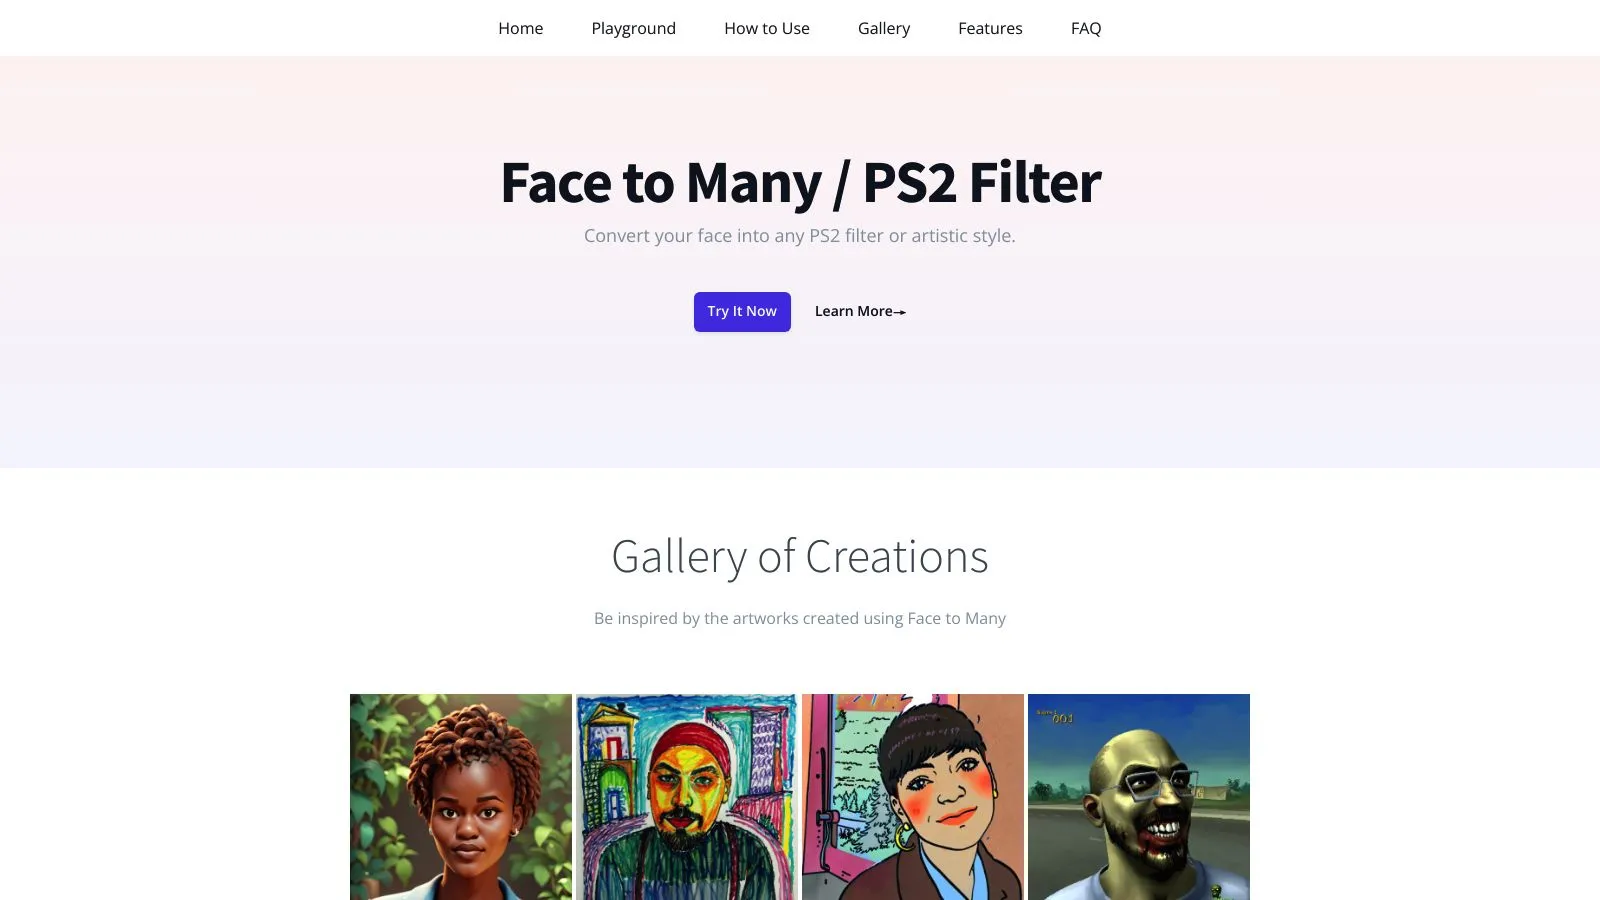 Featured image of Face to Many website